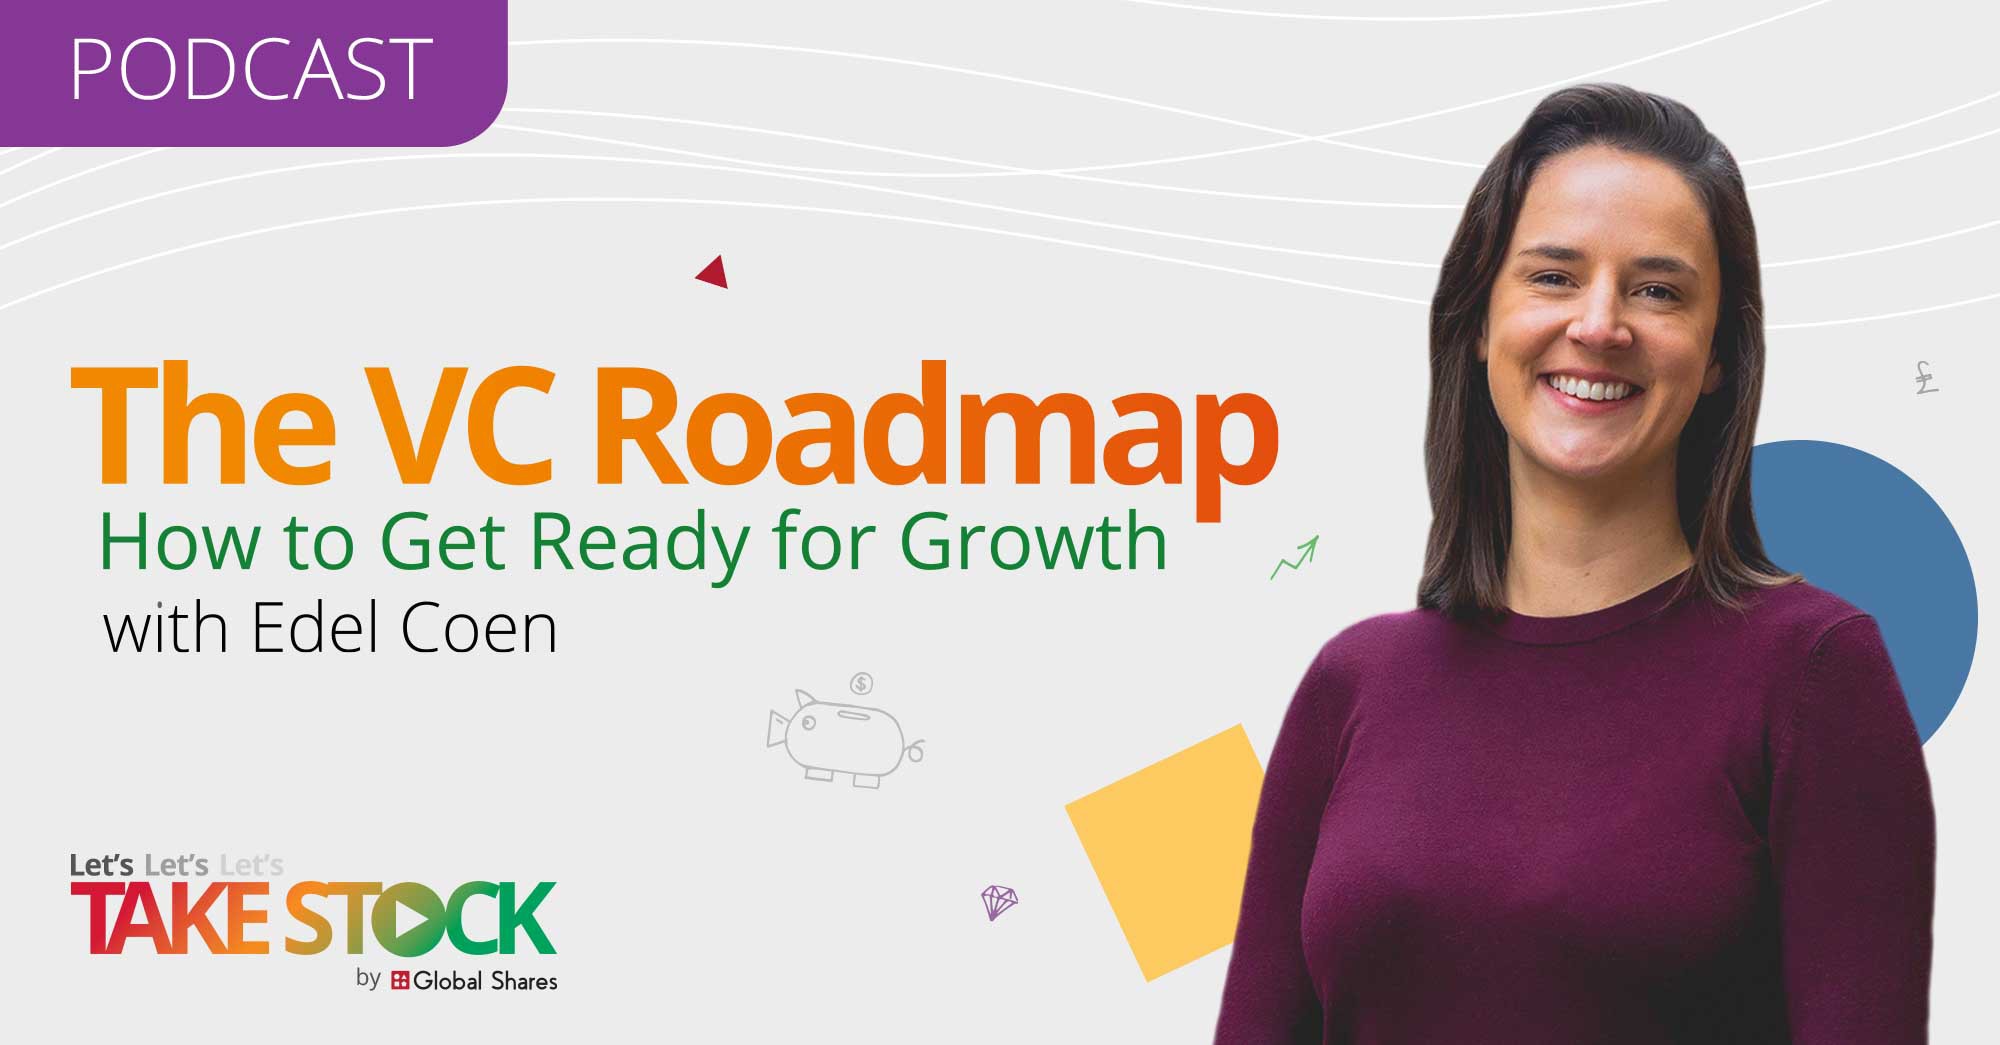 Let’s Take Stock Podcast: The VC Roadmap: How to Get Ready for Growth with Edel Coen